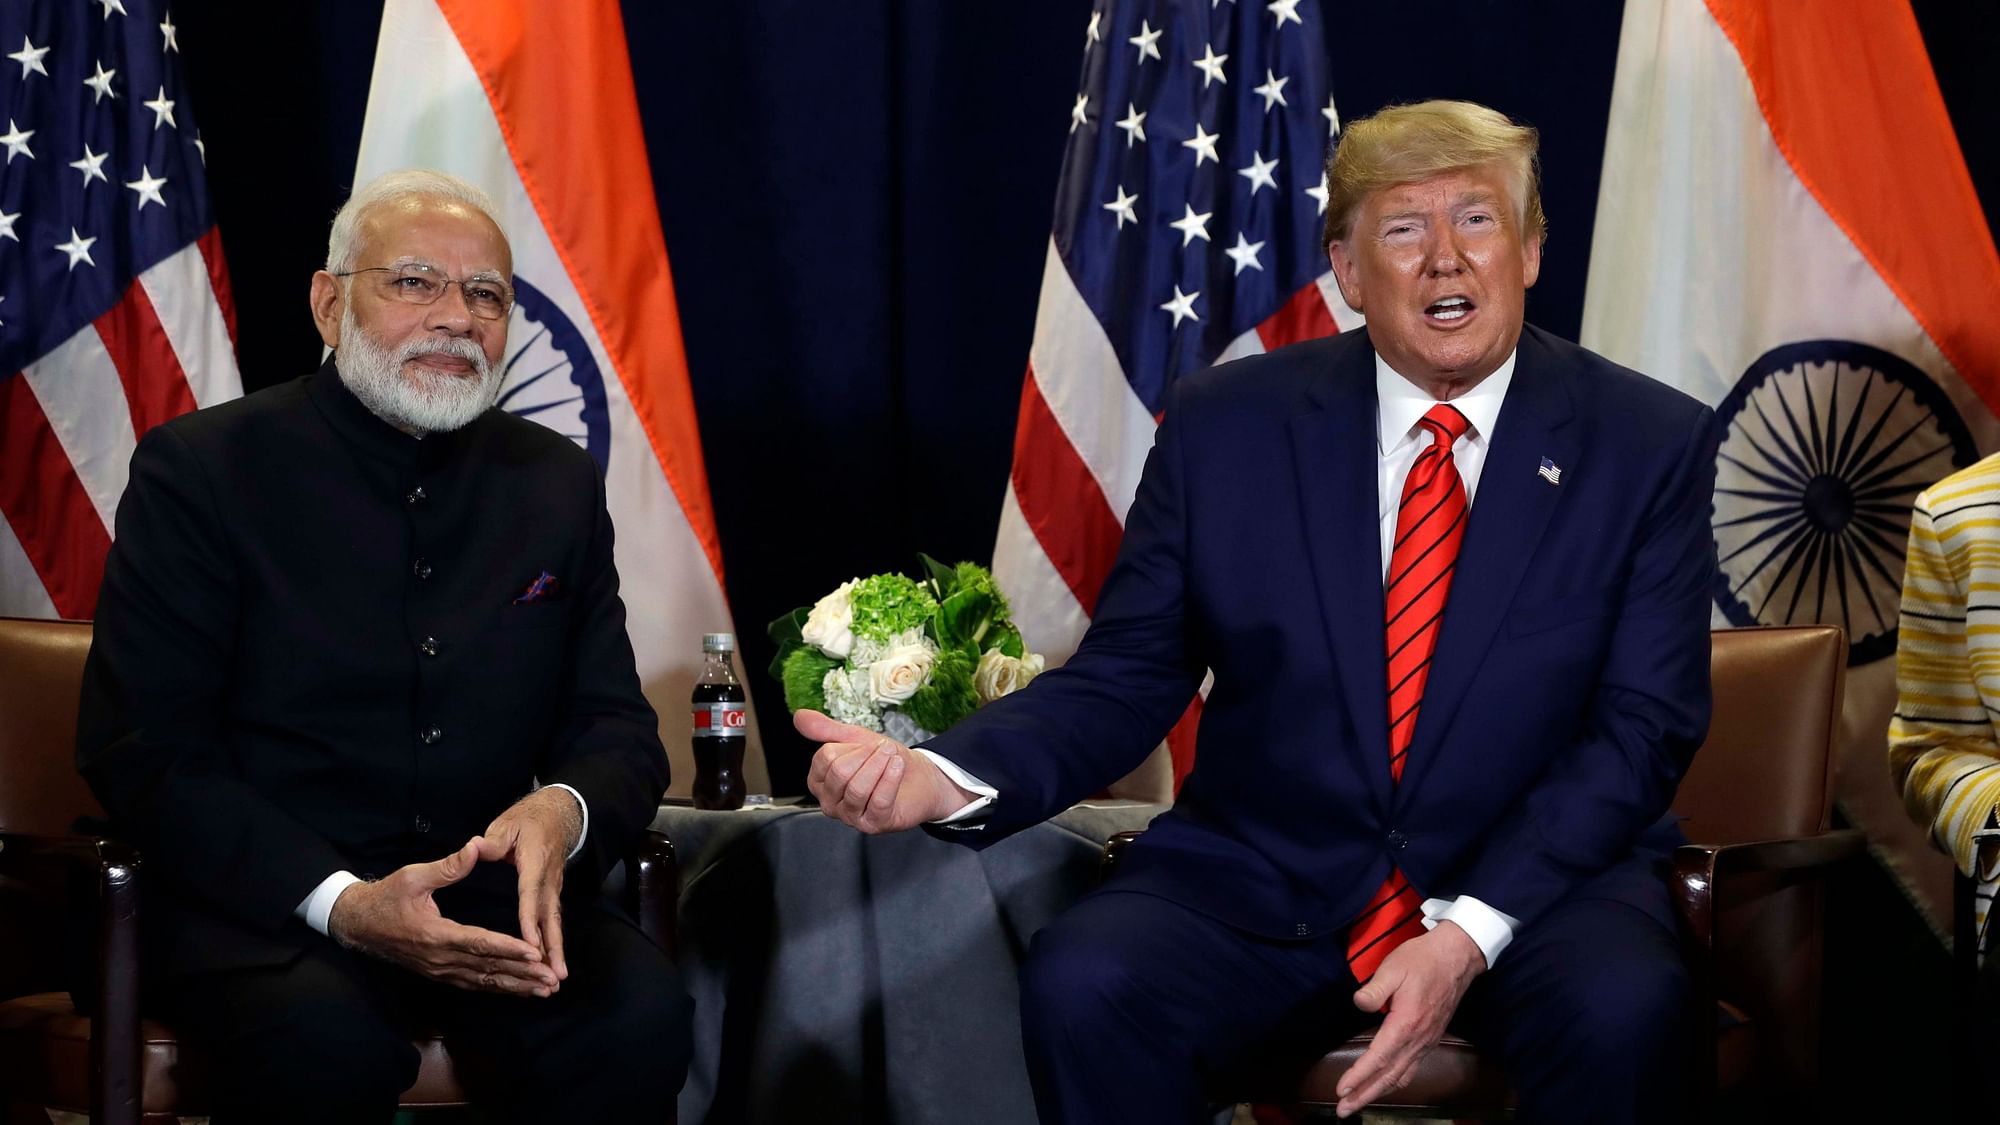 US President Donald Trump meets with PM Modi at the United Nations General Assembly.